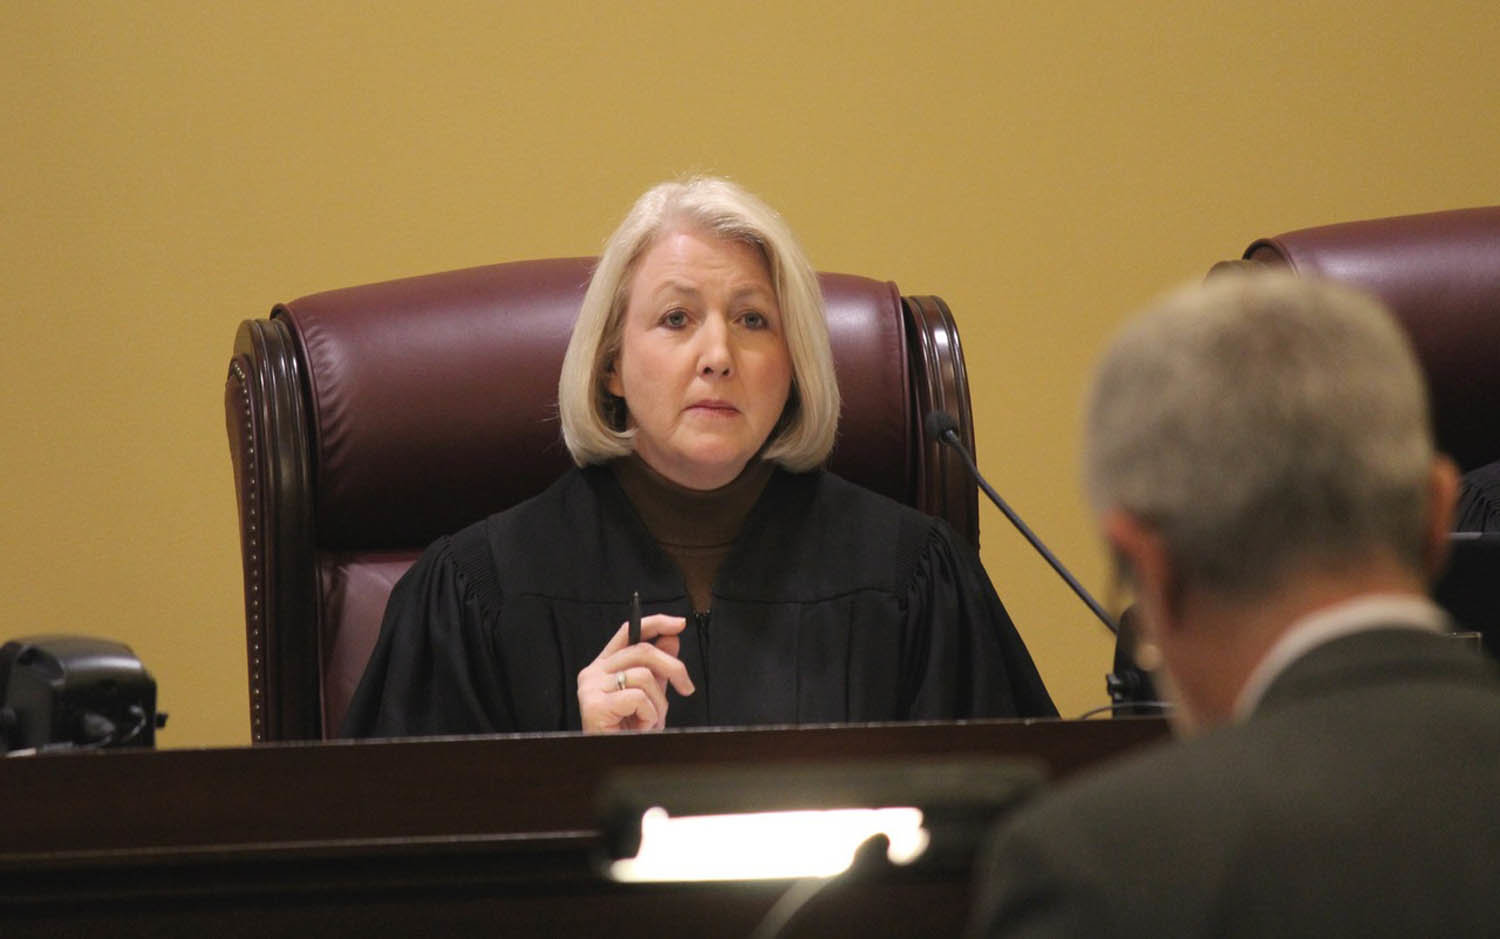 ALL RISE
Christian County Circuit Judge Laura Johnson hears oral arguments Dec. 11 with the Supreme Court of Missouri. She sat with the court in Jefferson City by special designation, in place of Judge Patricia Breckenridge, who was recused. Johnson heard the fourth case on the court’s docket, a disciplinary matter involving St. Louis County attorney Rebecca J. Grosser.